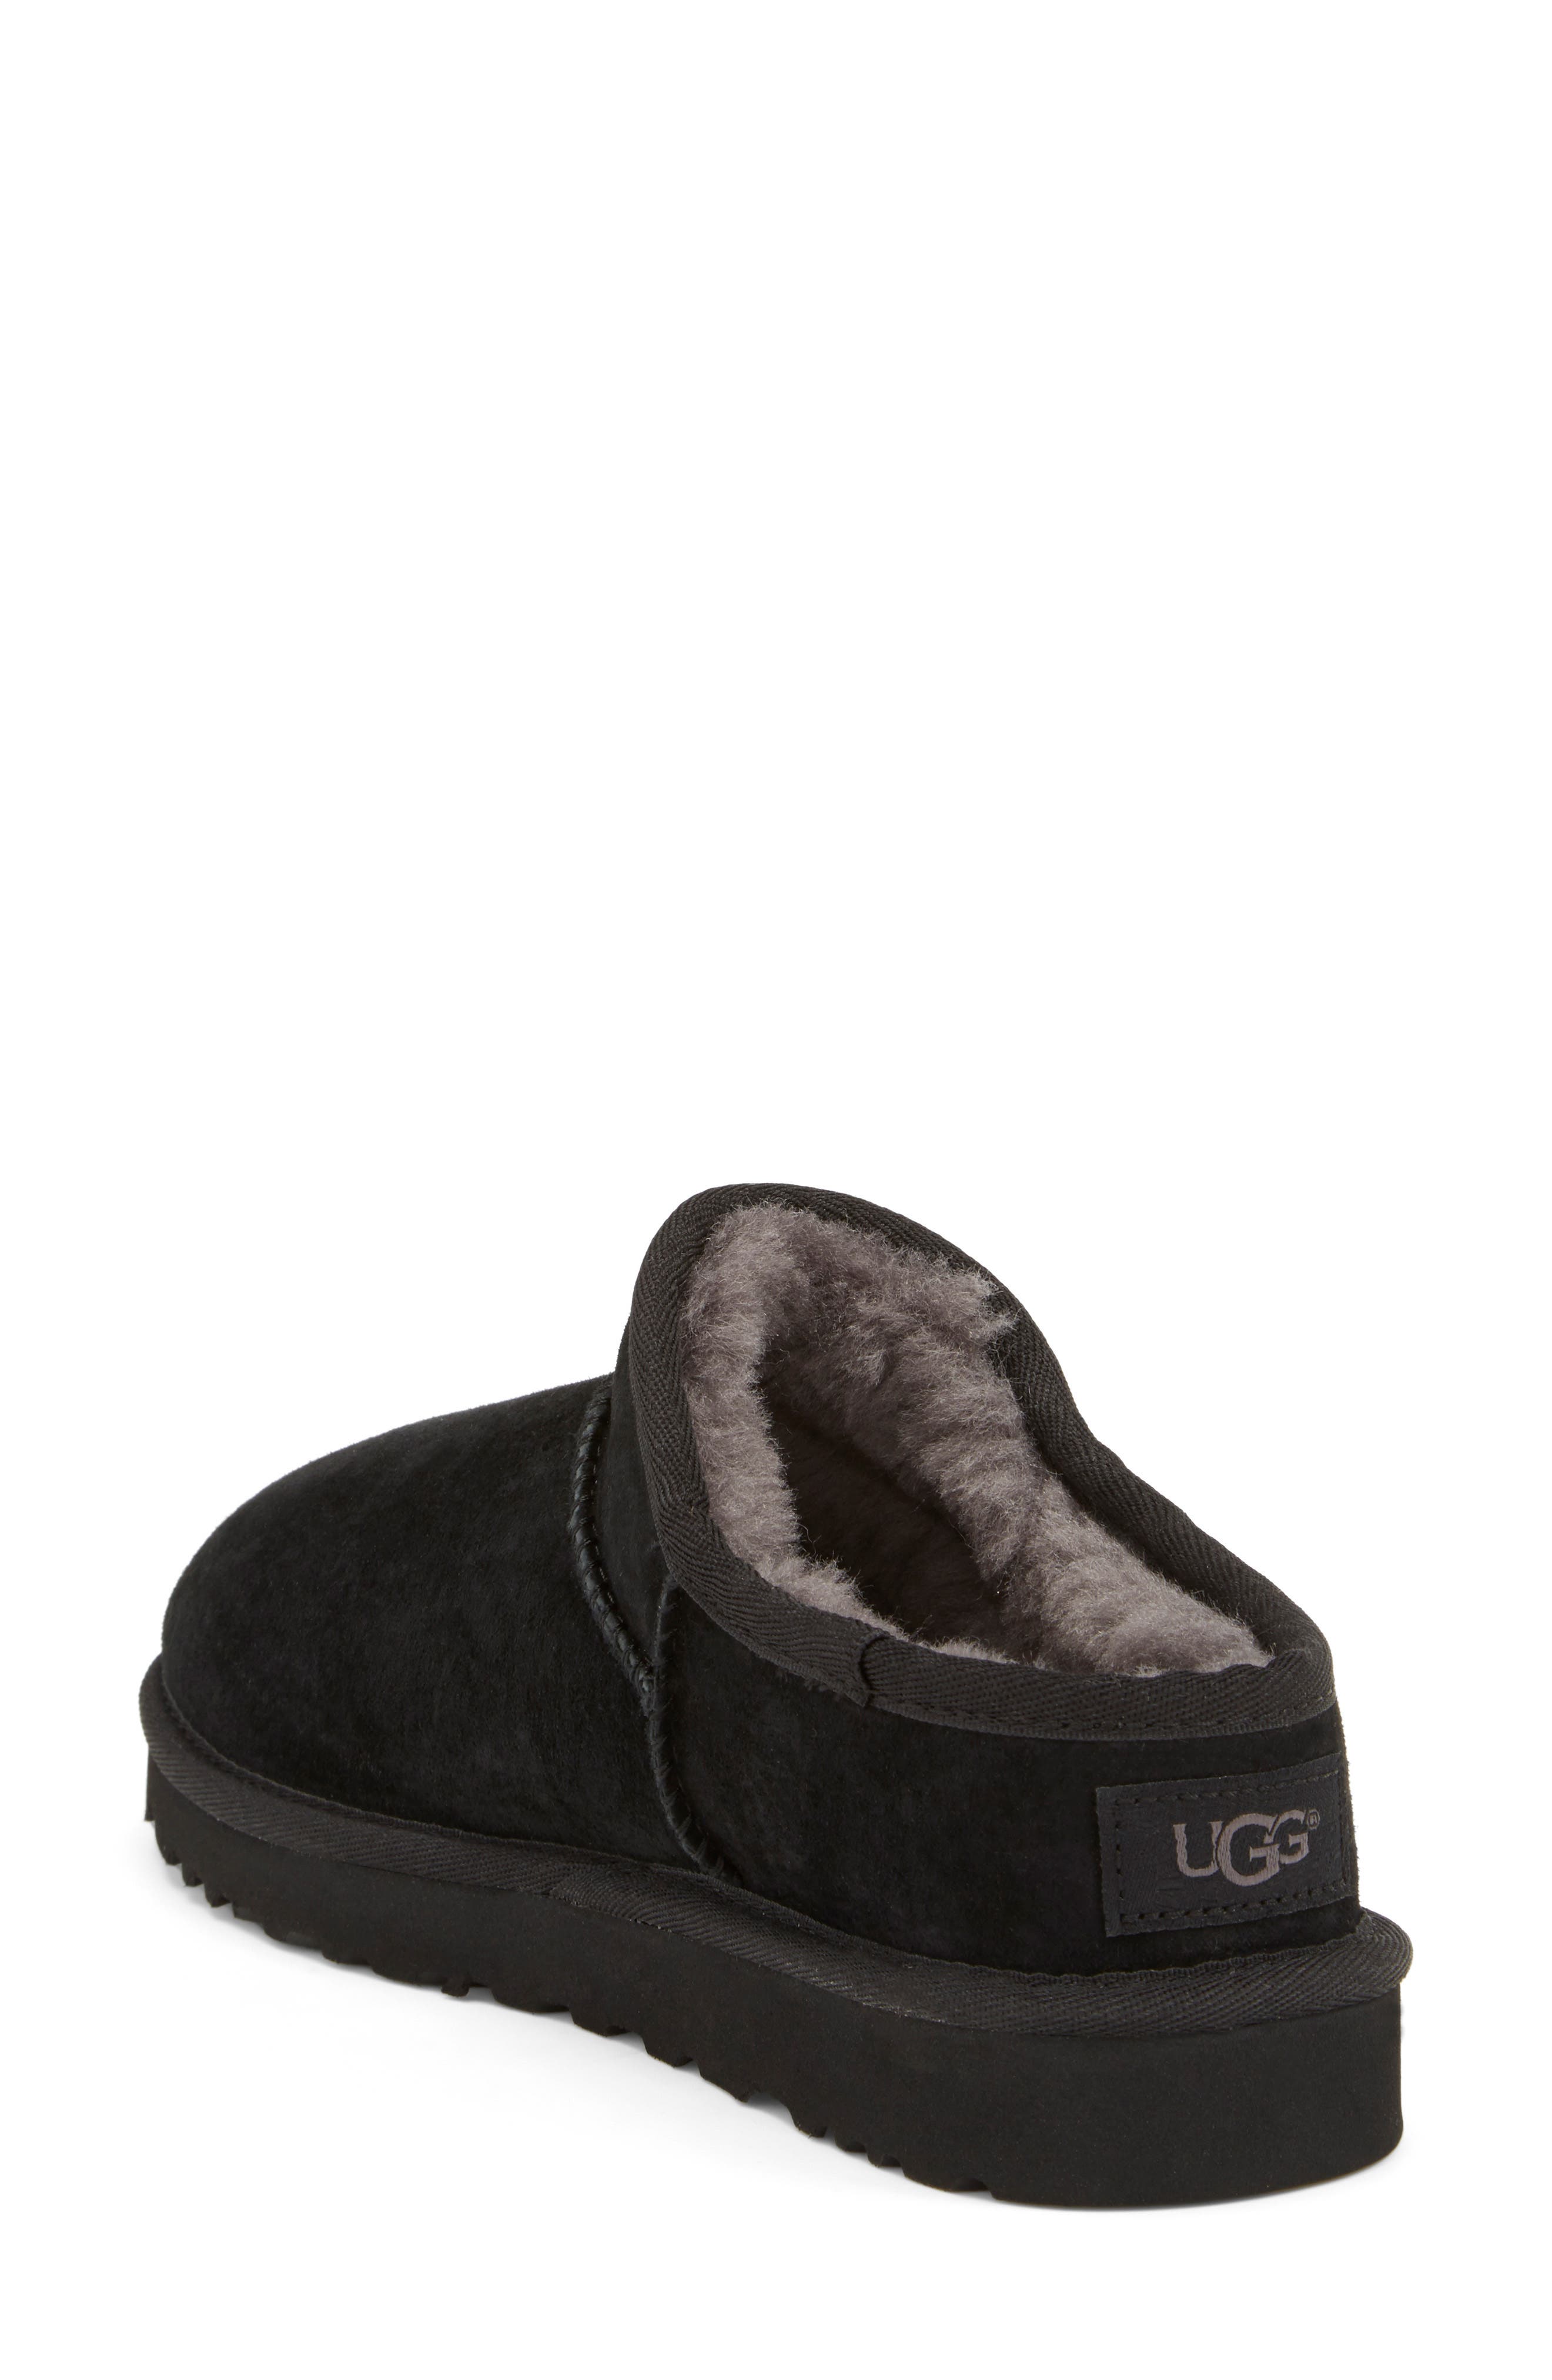 ugg classic water resistant slipper size 8